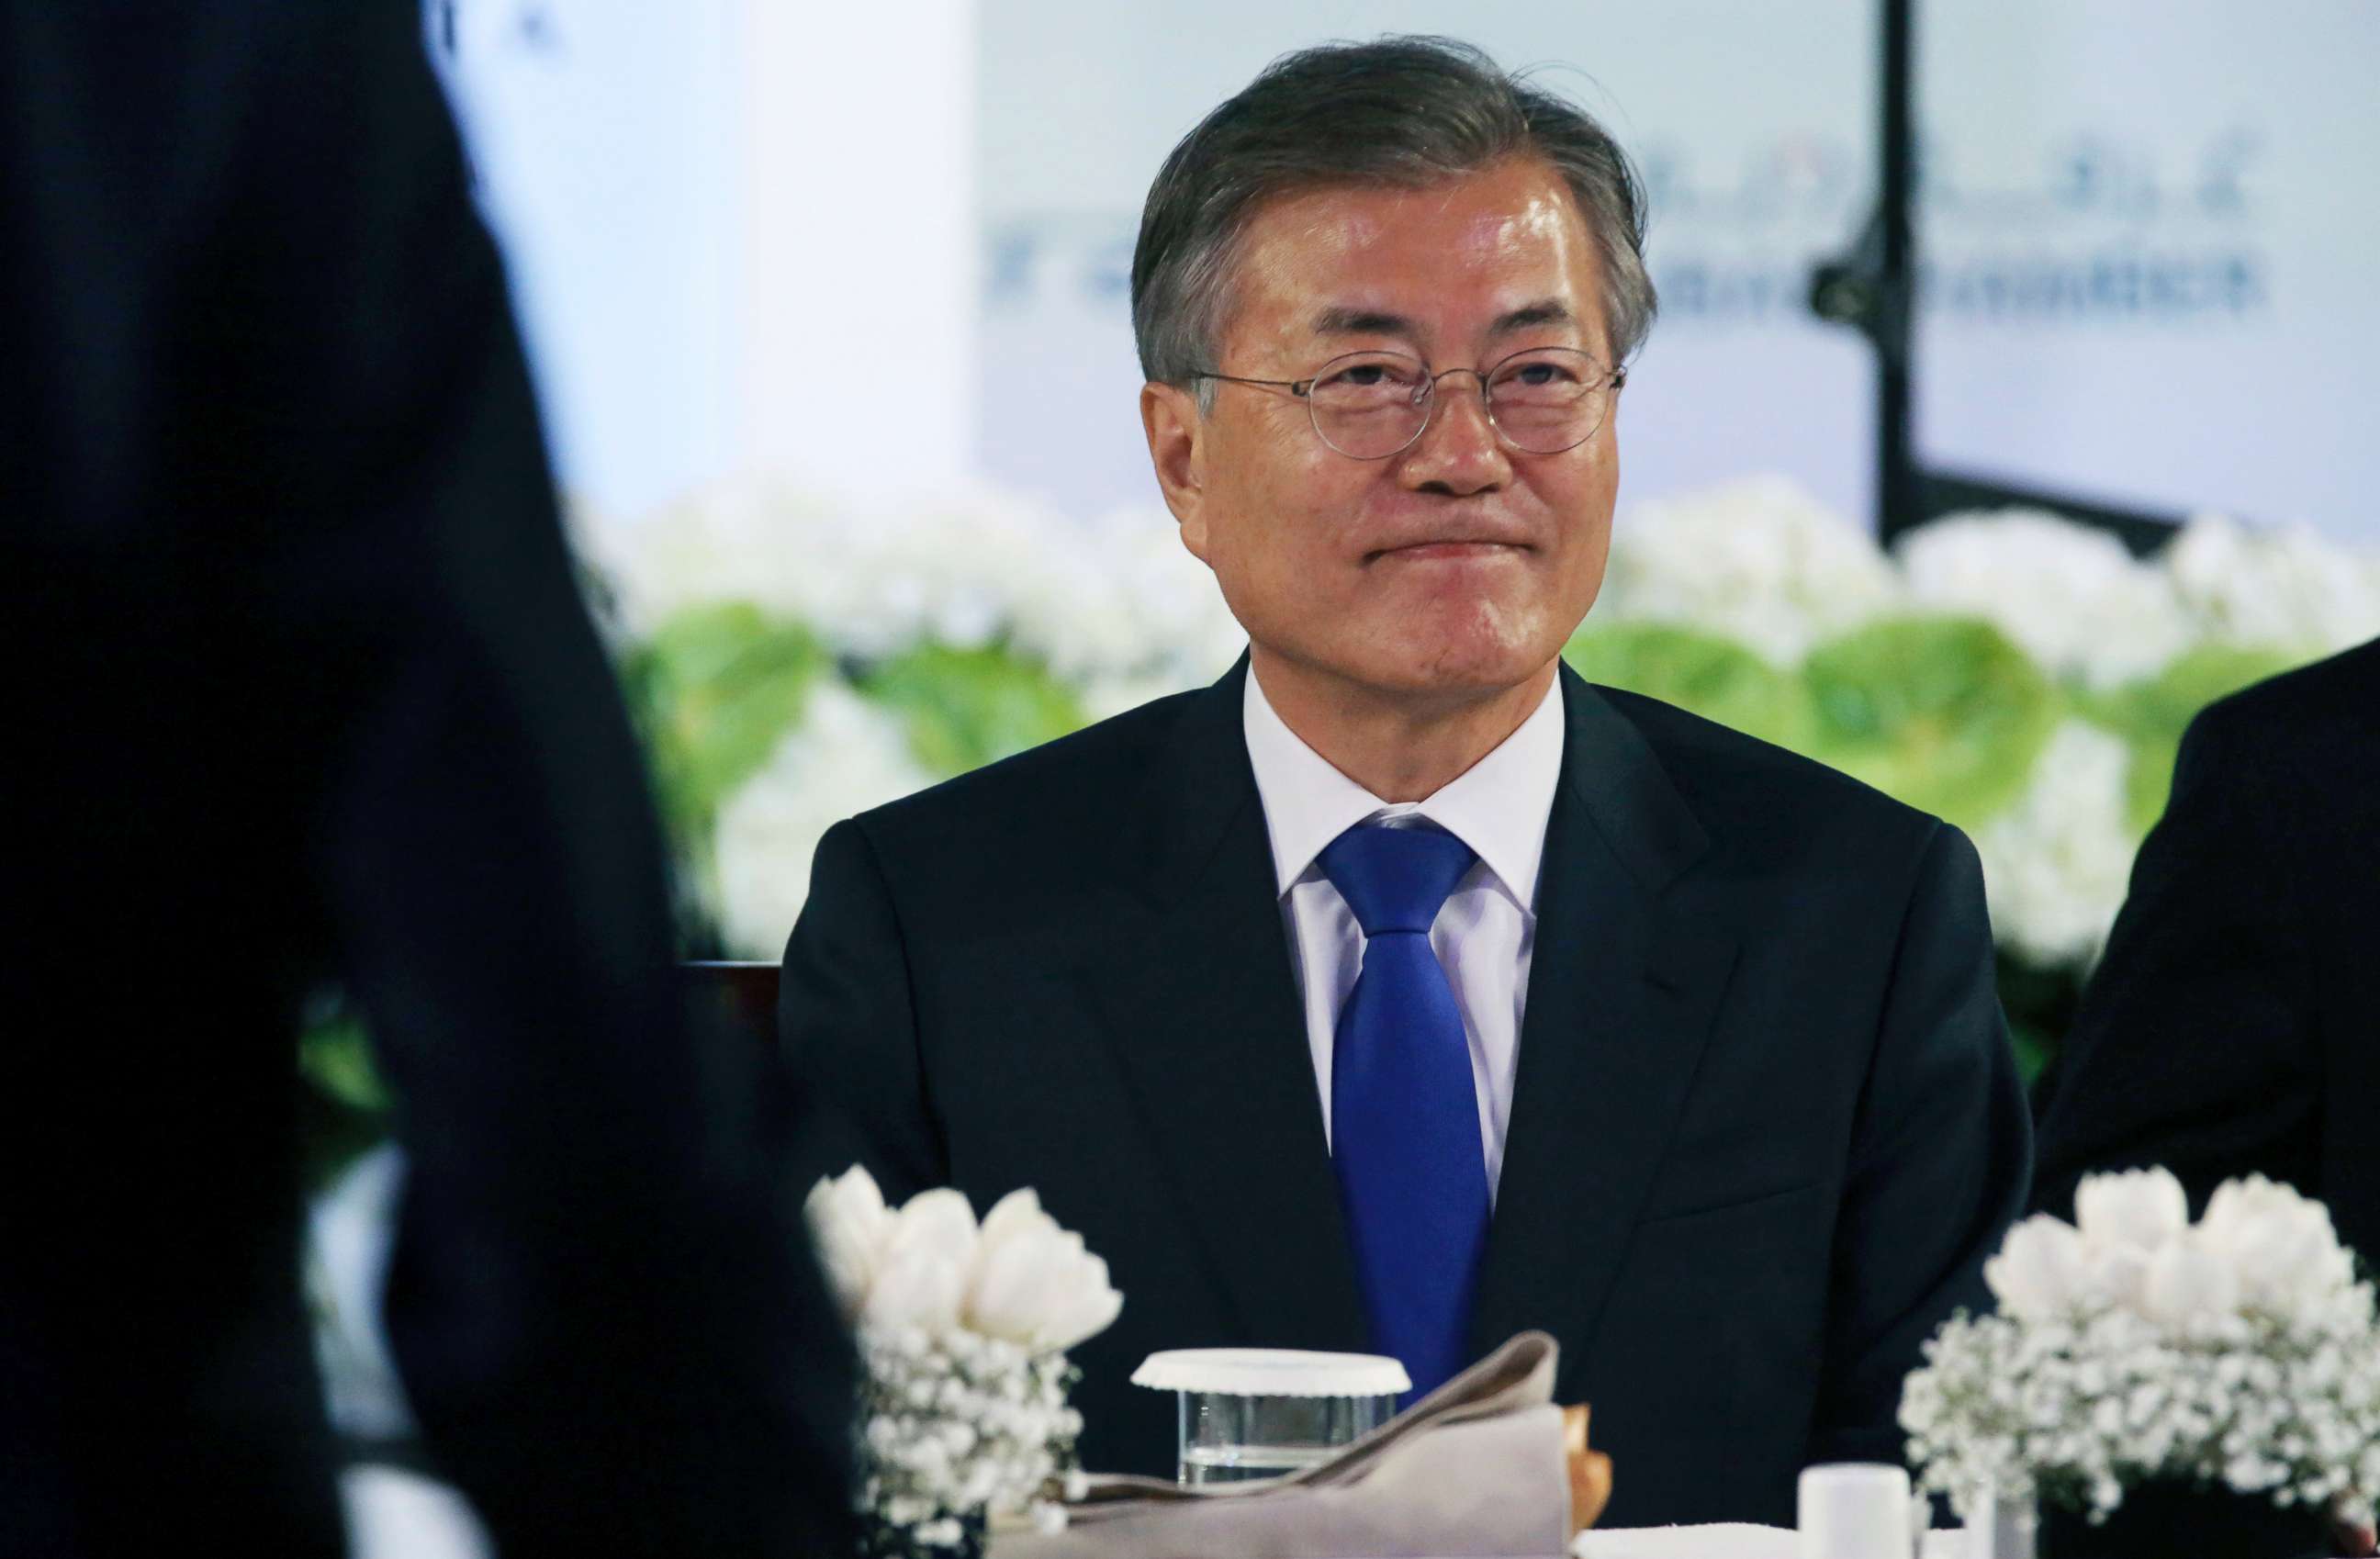 PHOTO: South Korean President Moon Jae-in attends a luncheon in Dubai, United Arab Emirates, March 27, 2018.